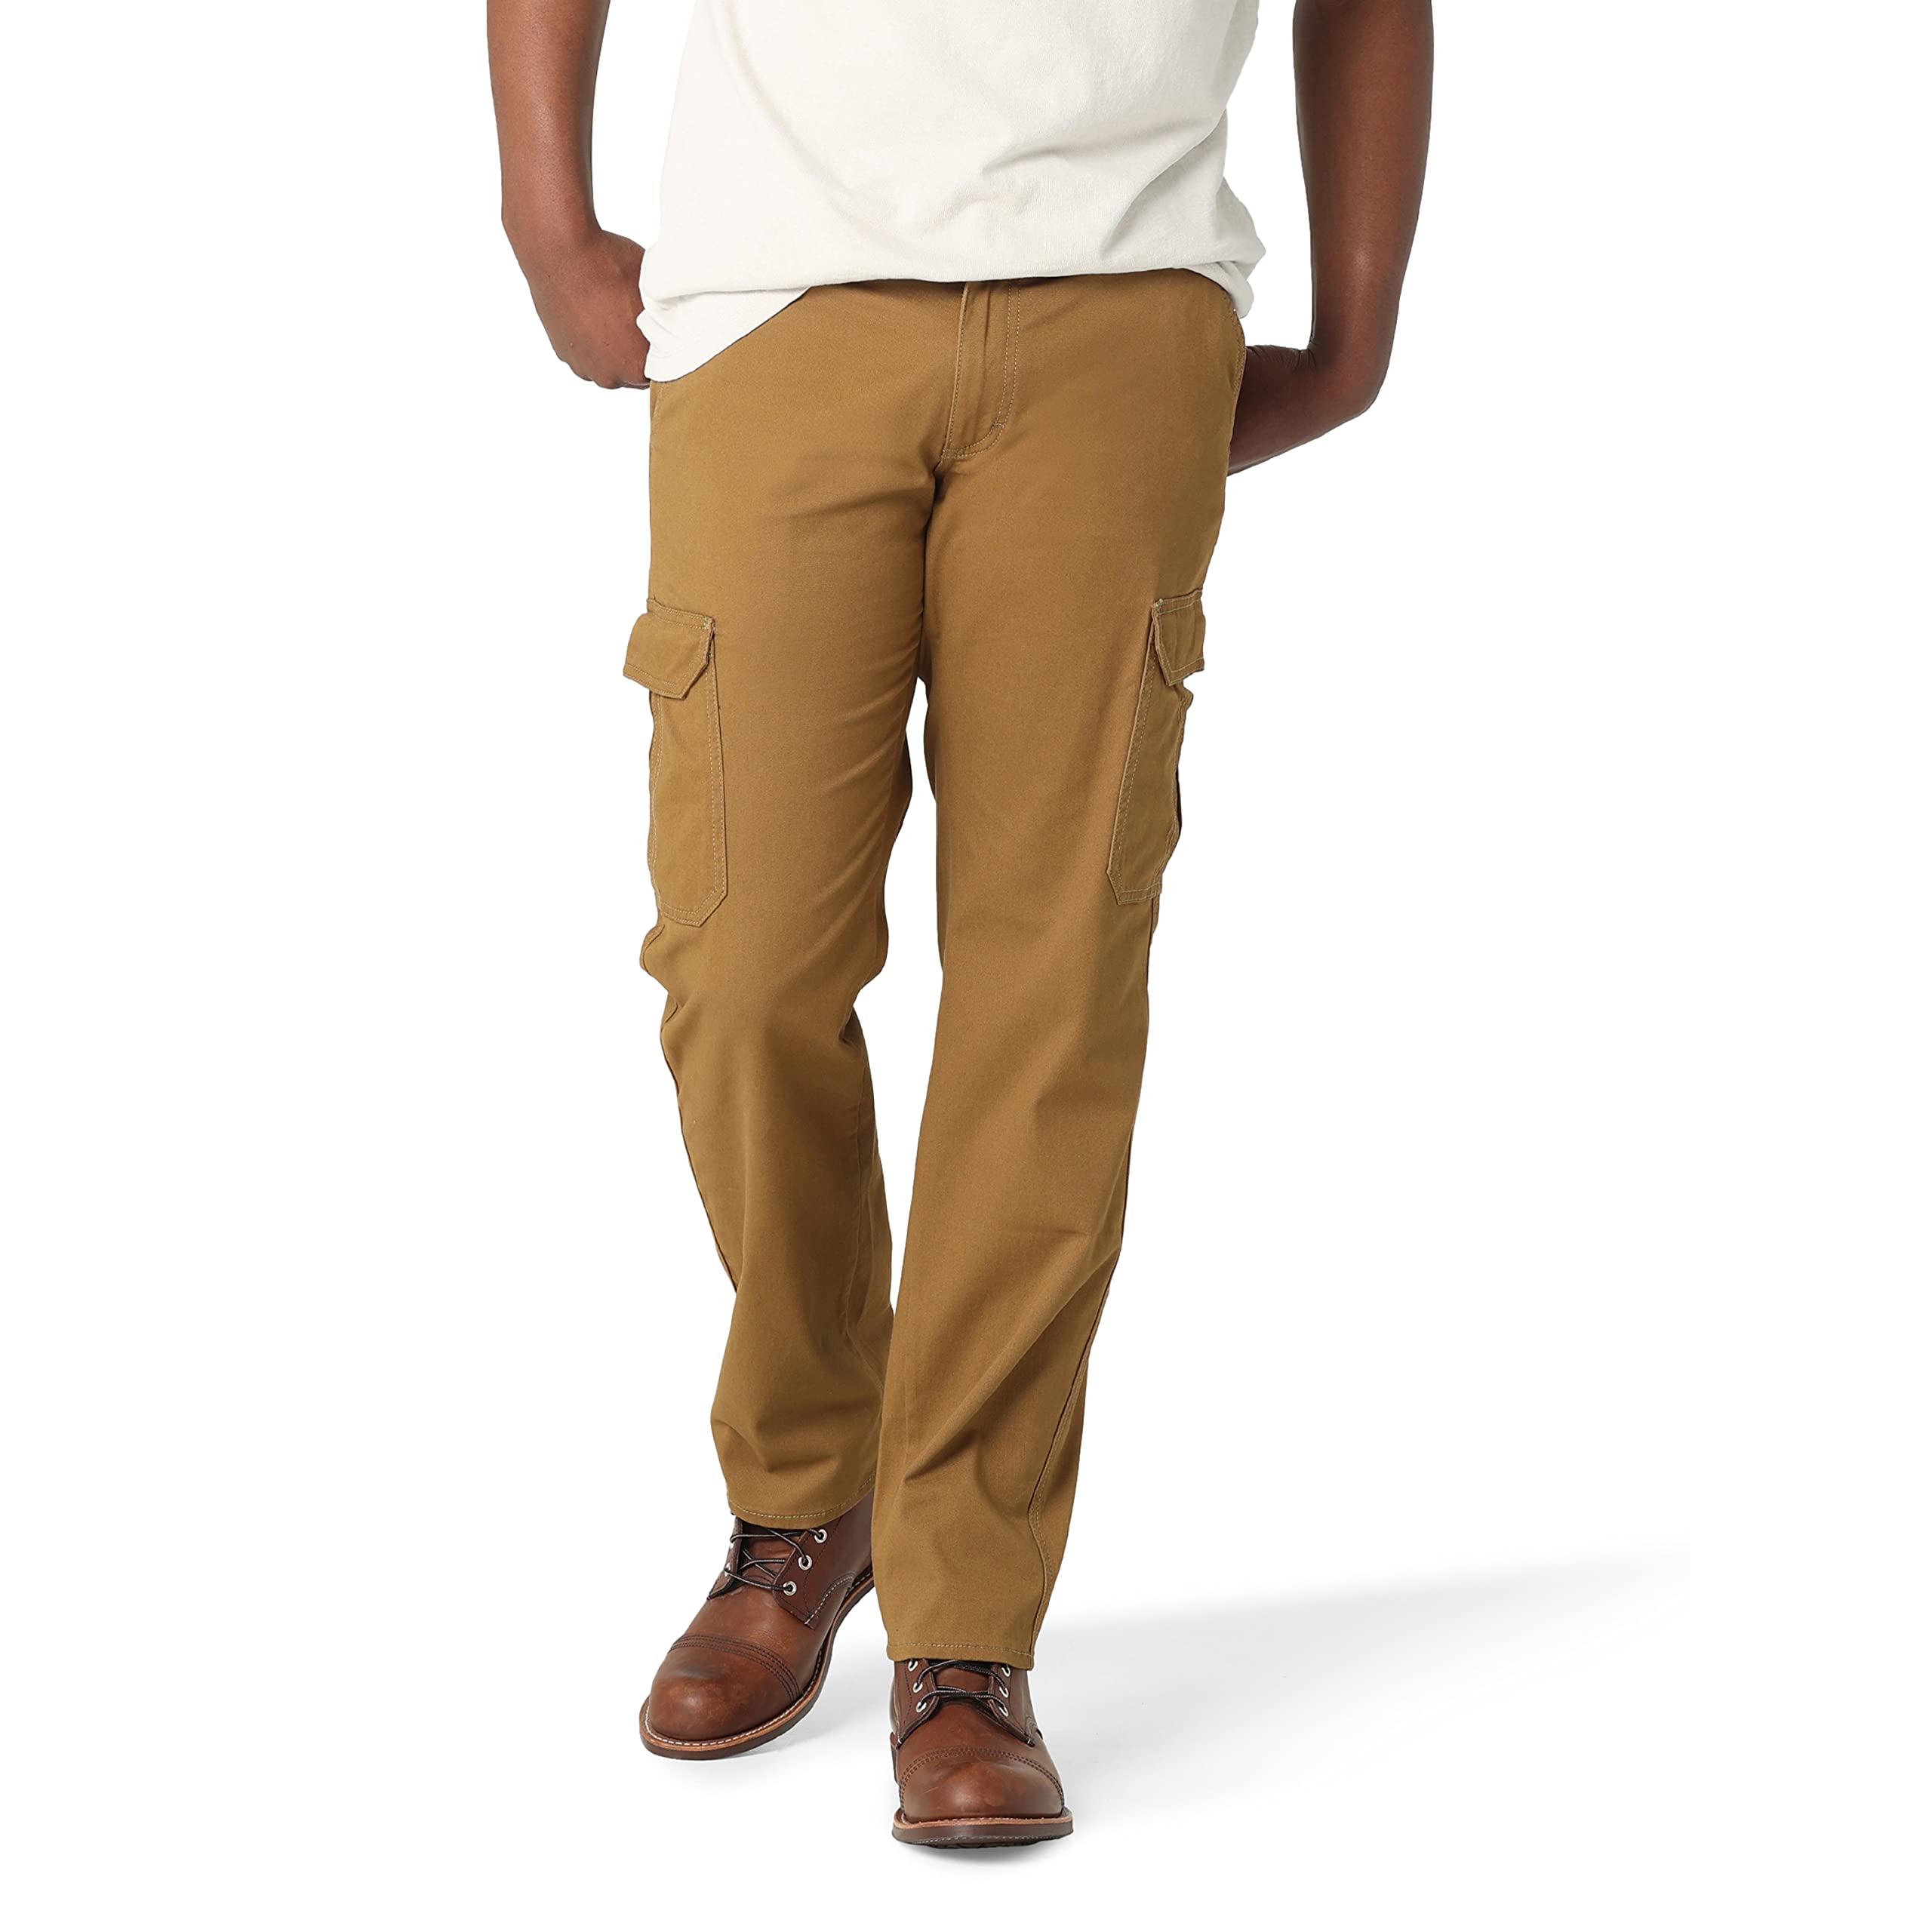 Lee Men's Extreme Motion Twill Cargo Pant (Tumbleweed) $20.19 + Free Shipping w/ Prime or on $35+